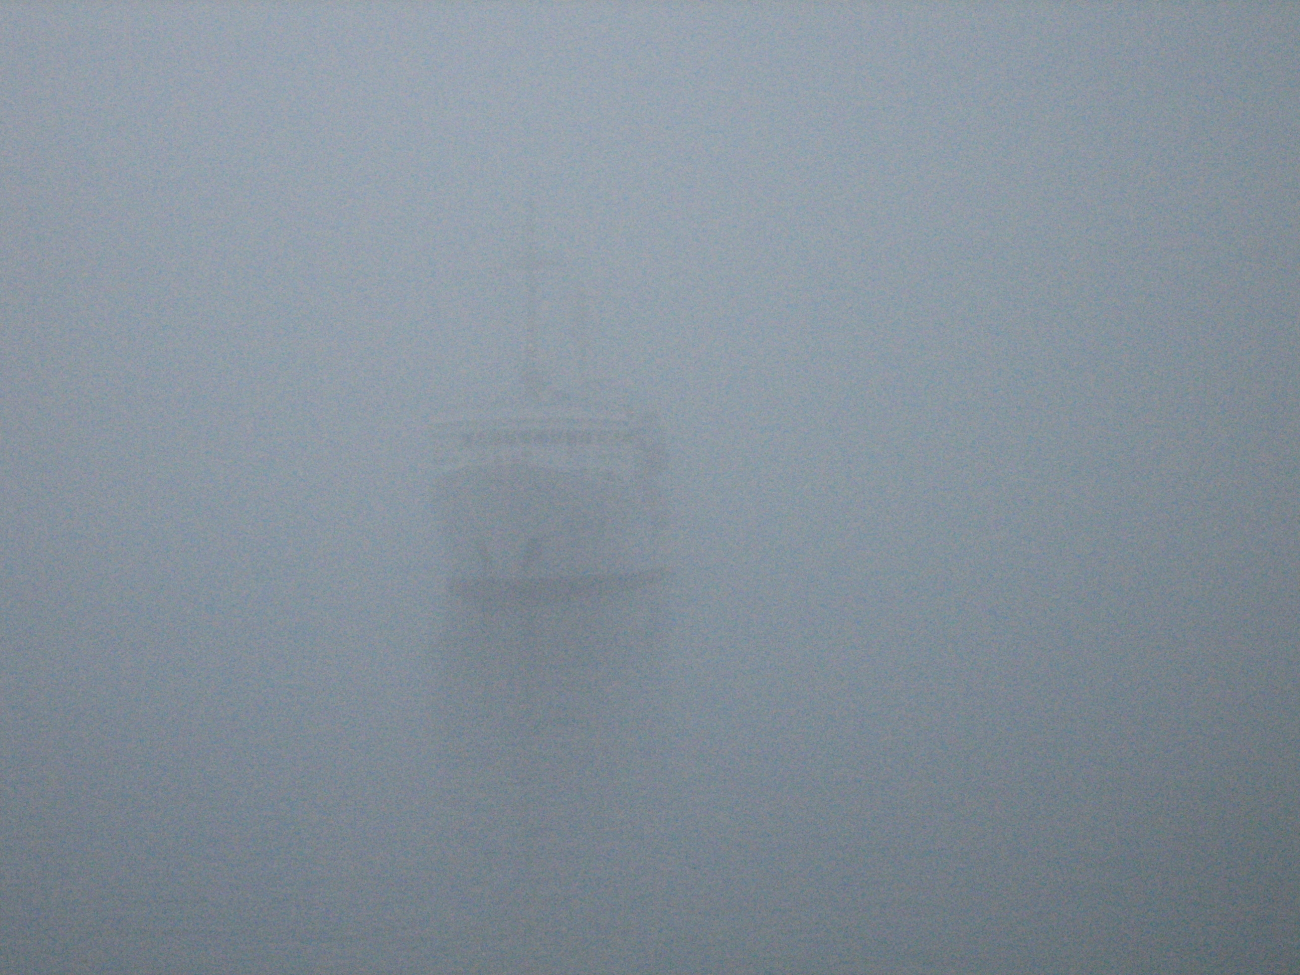 Photo #3of NOAA Ship FAIRWEATHER approaching pier in fog at Valdez